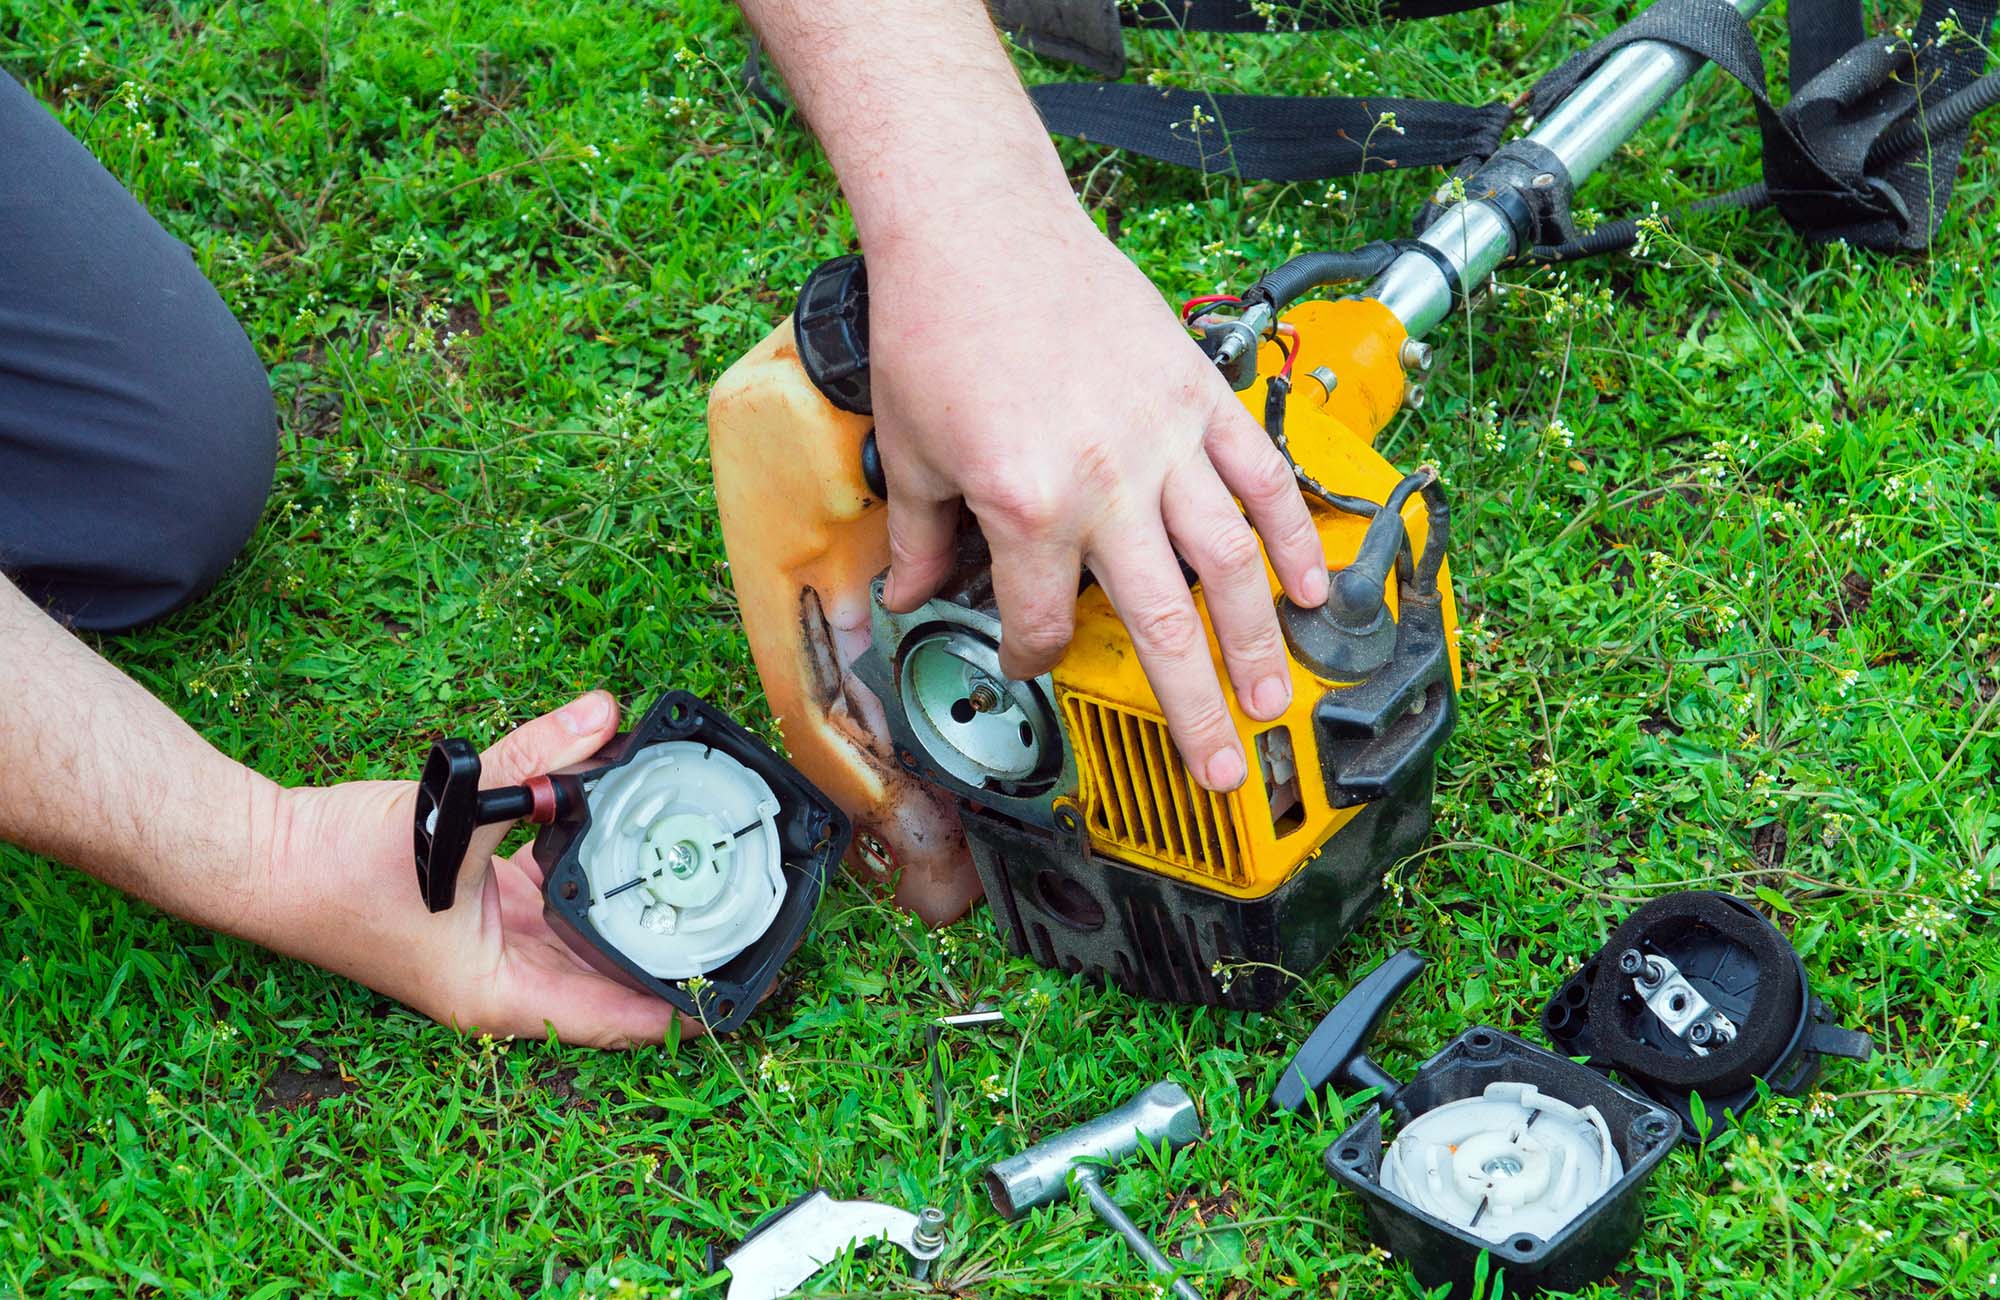 Worker repairs a starter in trimmer or lawn mower that lies on the grass